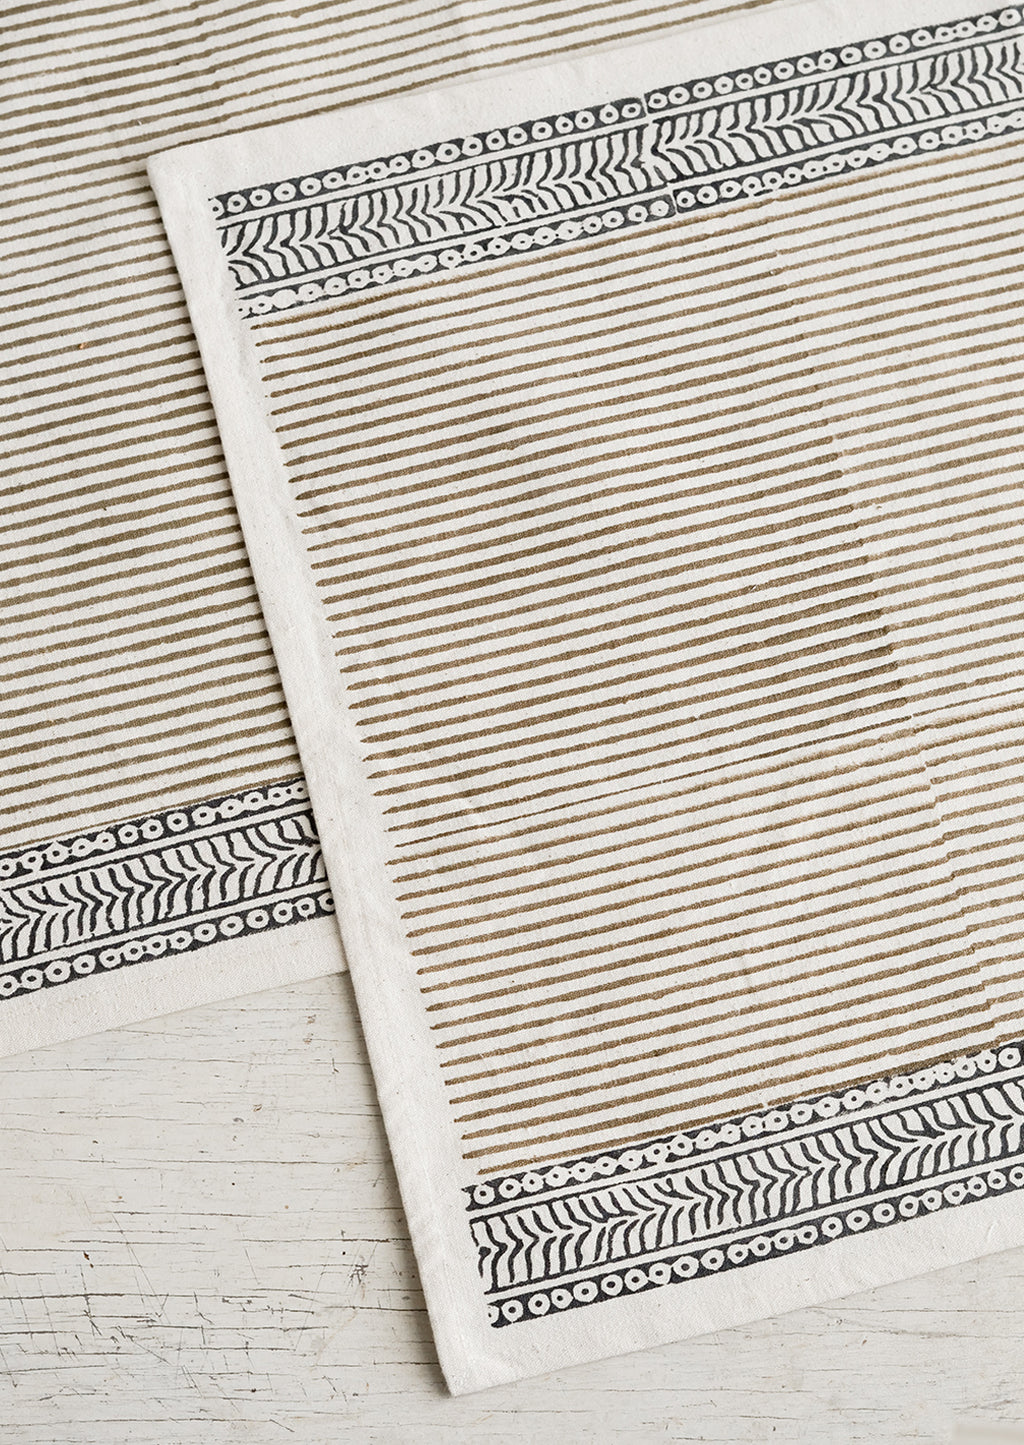 Taupe / Deep Indigo: A cotton placemat with block print design, borders at top and bottom with striped center.